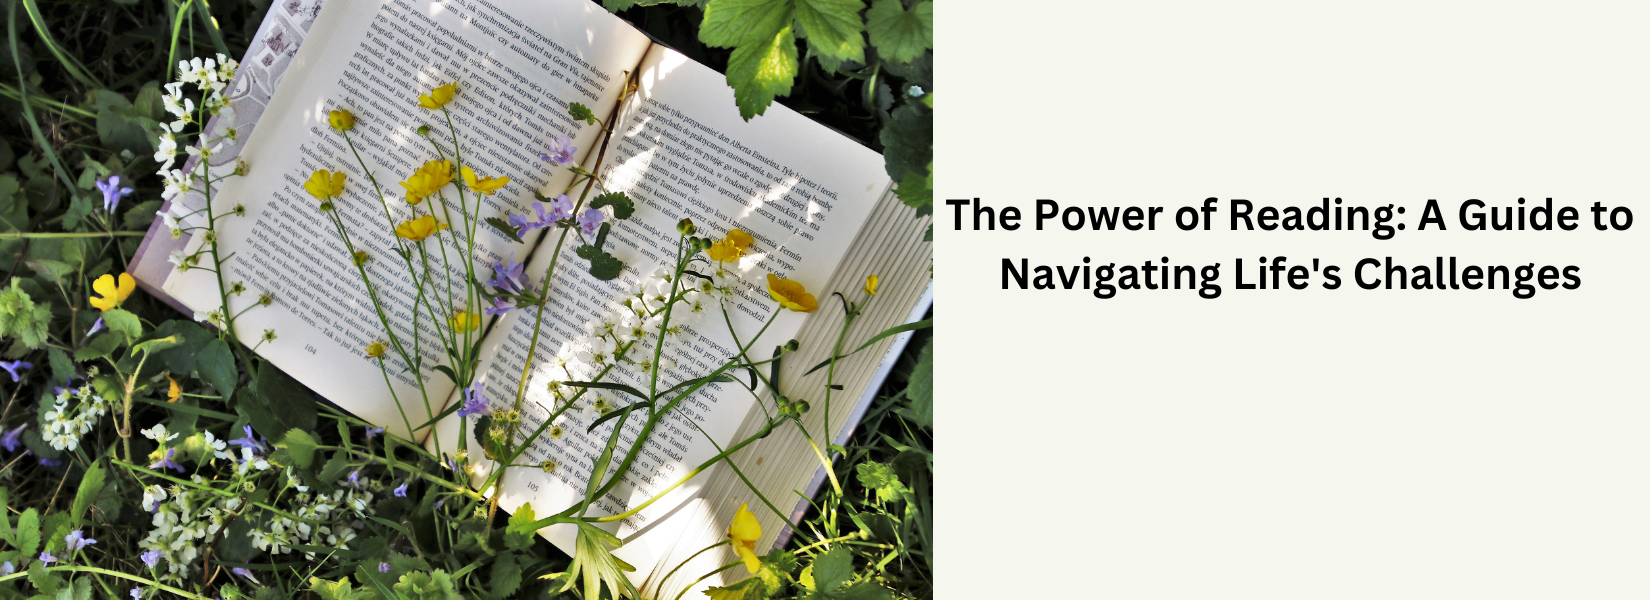 The Power of Reading: A Guide to Navigating Life's Challenges